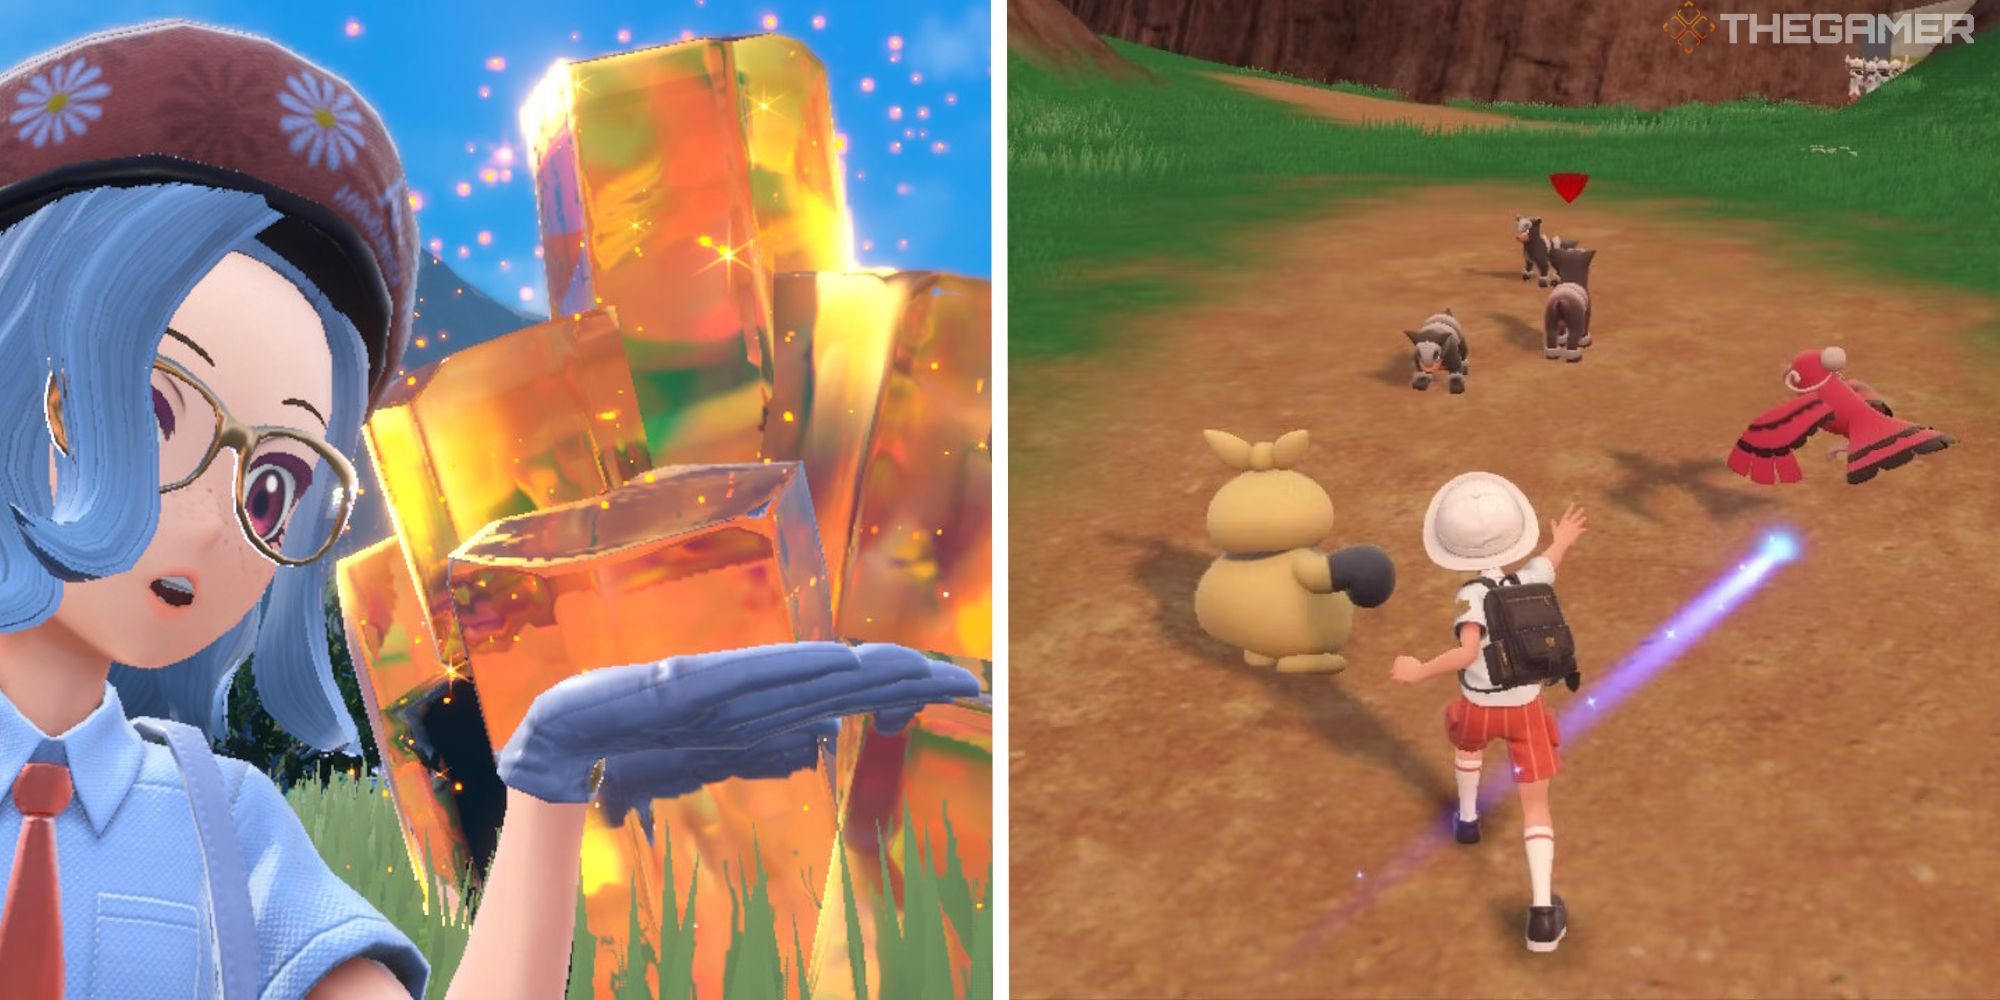 split image showing player at raid battle next to image of player auto-battling